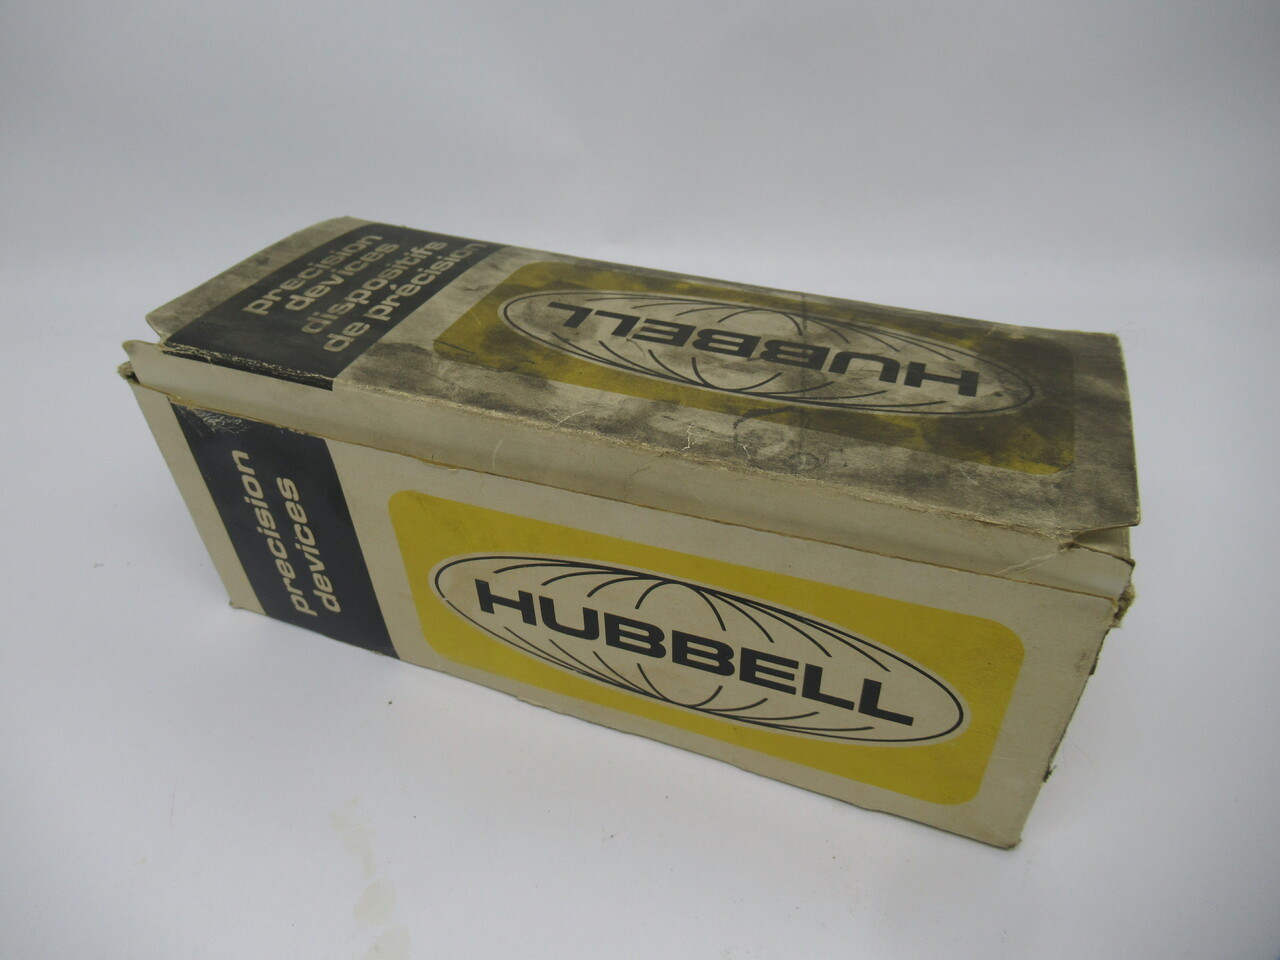 Hubbell 2623 Twist-Lock Connector 30A 250V 2 Pole Lot of 10 NEW